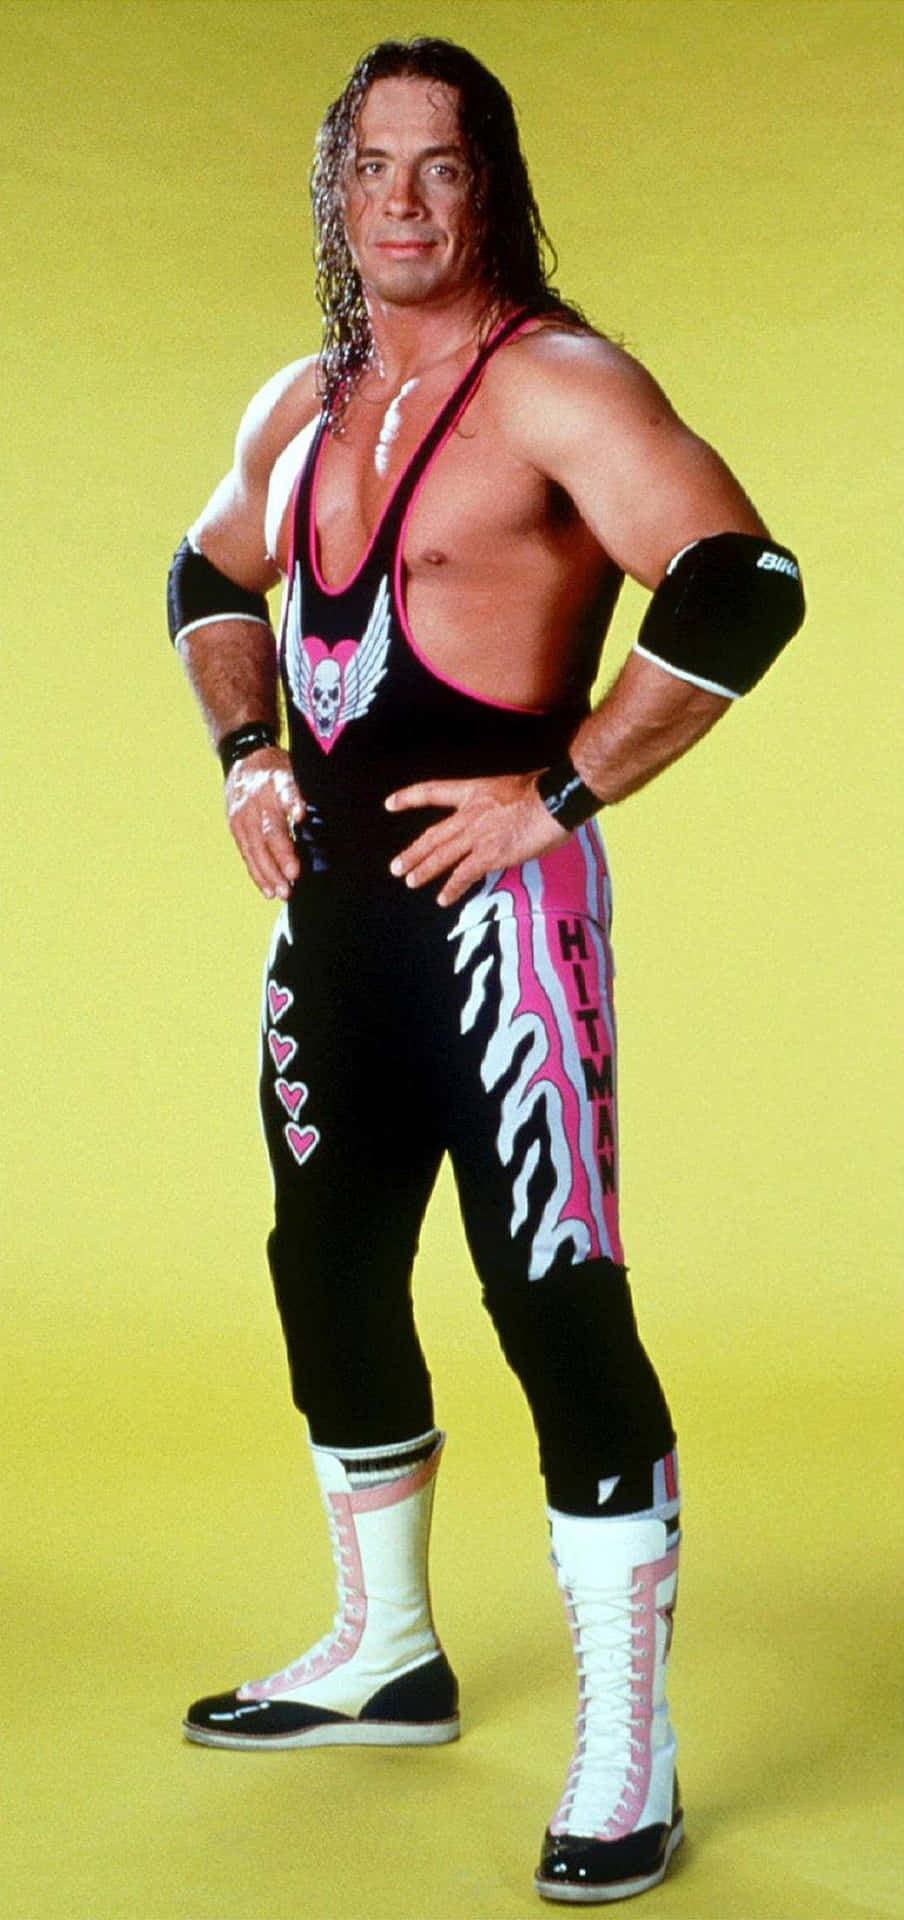 Bret The Hitman Hart poster  Hitman hart Wrestling posters Wwe pictures